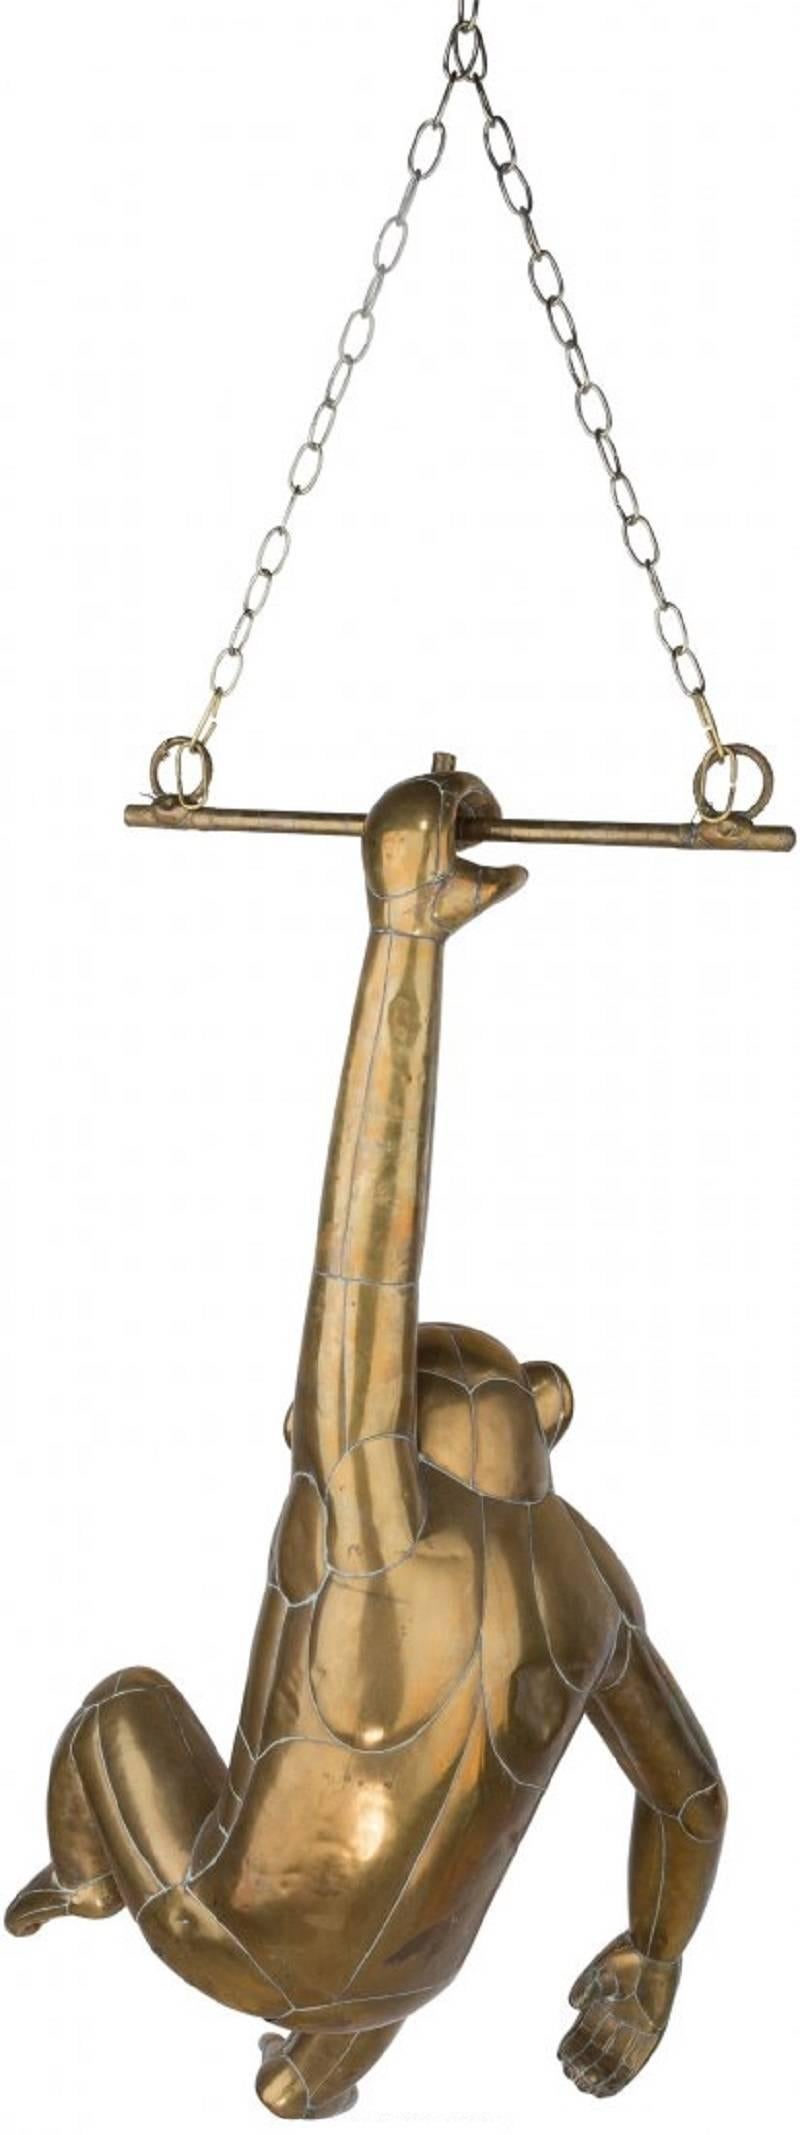 This charming sculpture by Mexican artist and sculptor Sergio Bustamante (b. 1949) depicts a chimpanzee hanging from a trapeze bar. Each piece has been expertly crafted and then carefully pieced together to create this lifesize piece. The expression